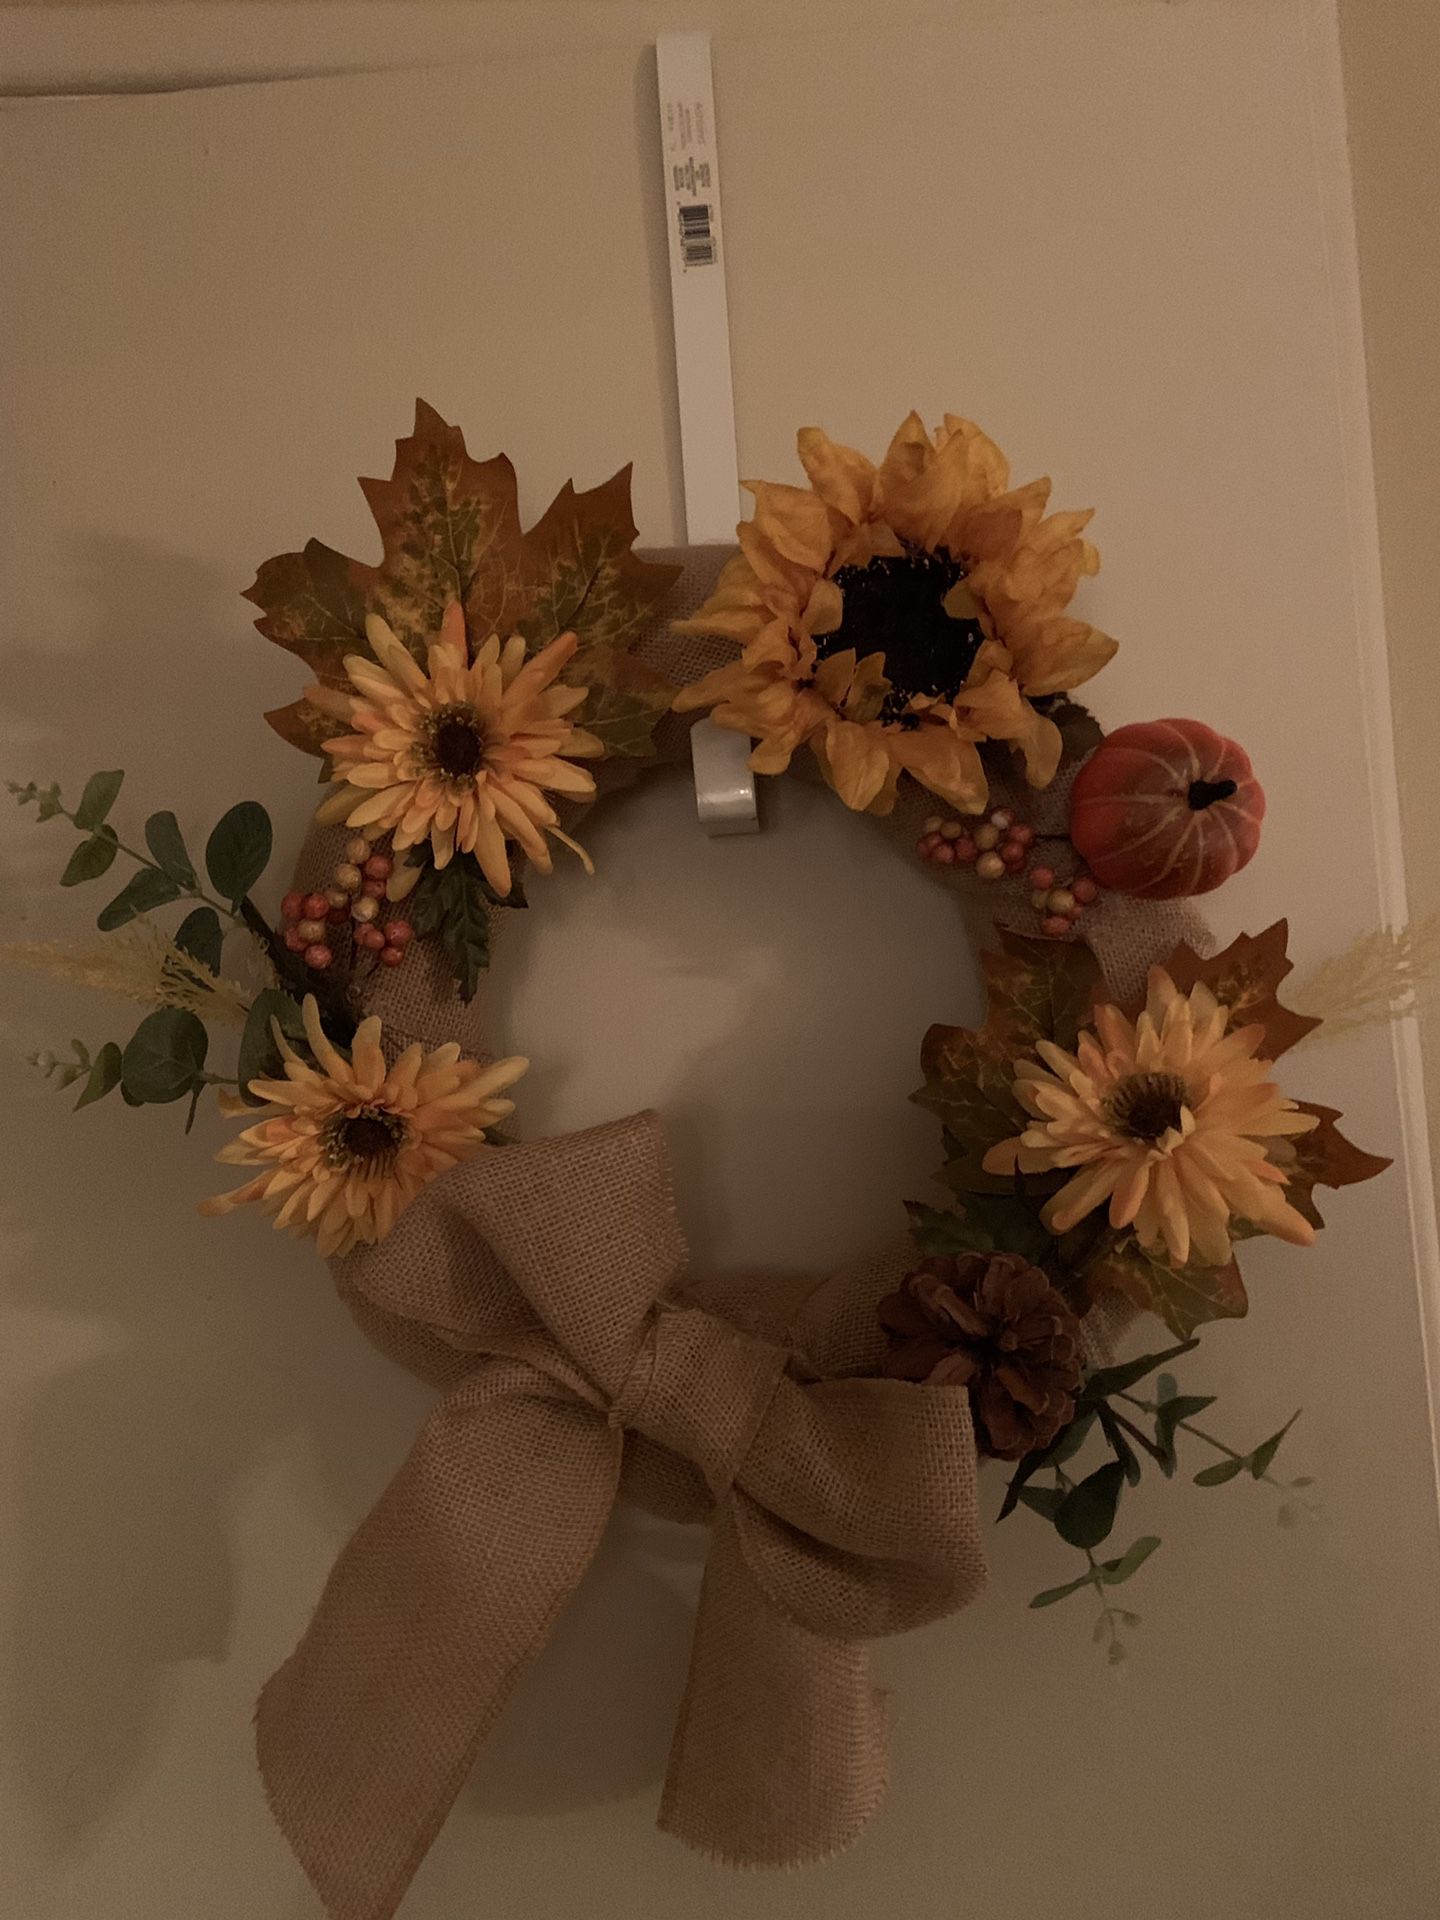 Rustic Fall wreath with sunflowers and burlap- hand made